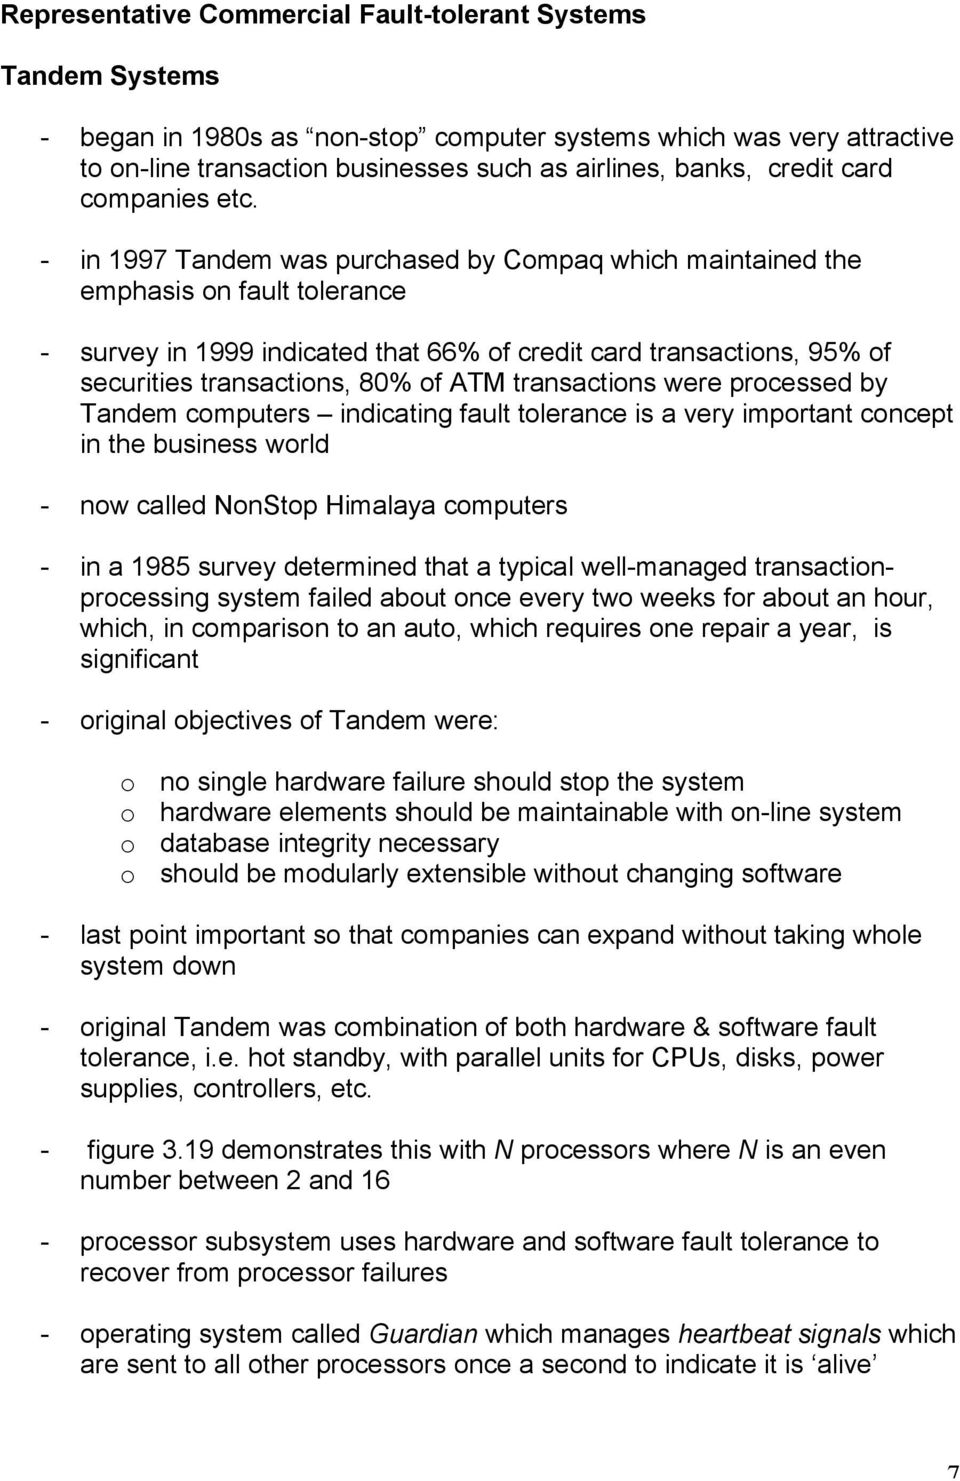 - in 1997 Tandem was purchased by Compaq which maintained the emphasis on fault tolerance - survey in 1999 indicated that 66% of credit card transactions, 95% of securities transactions, 80% of ATM